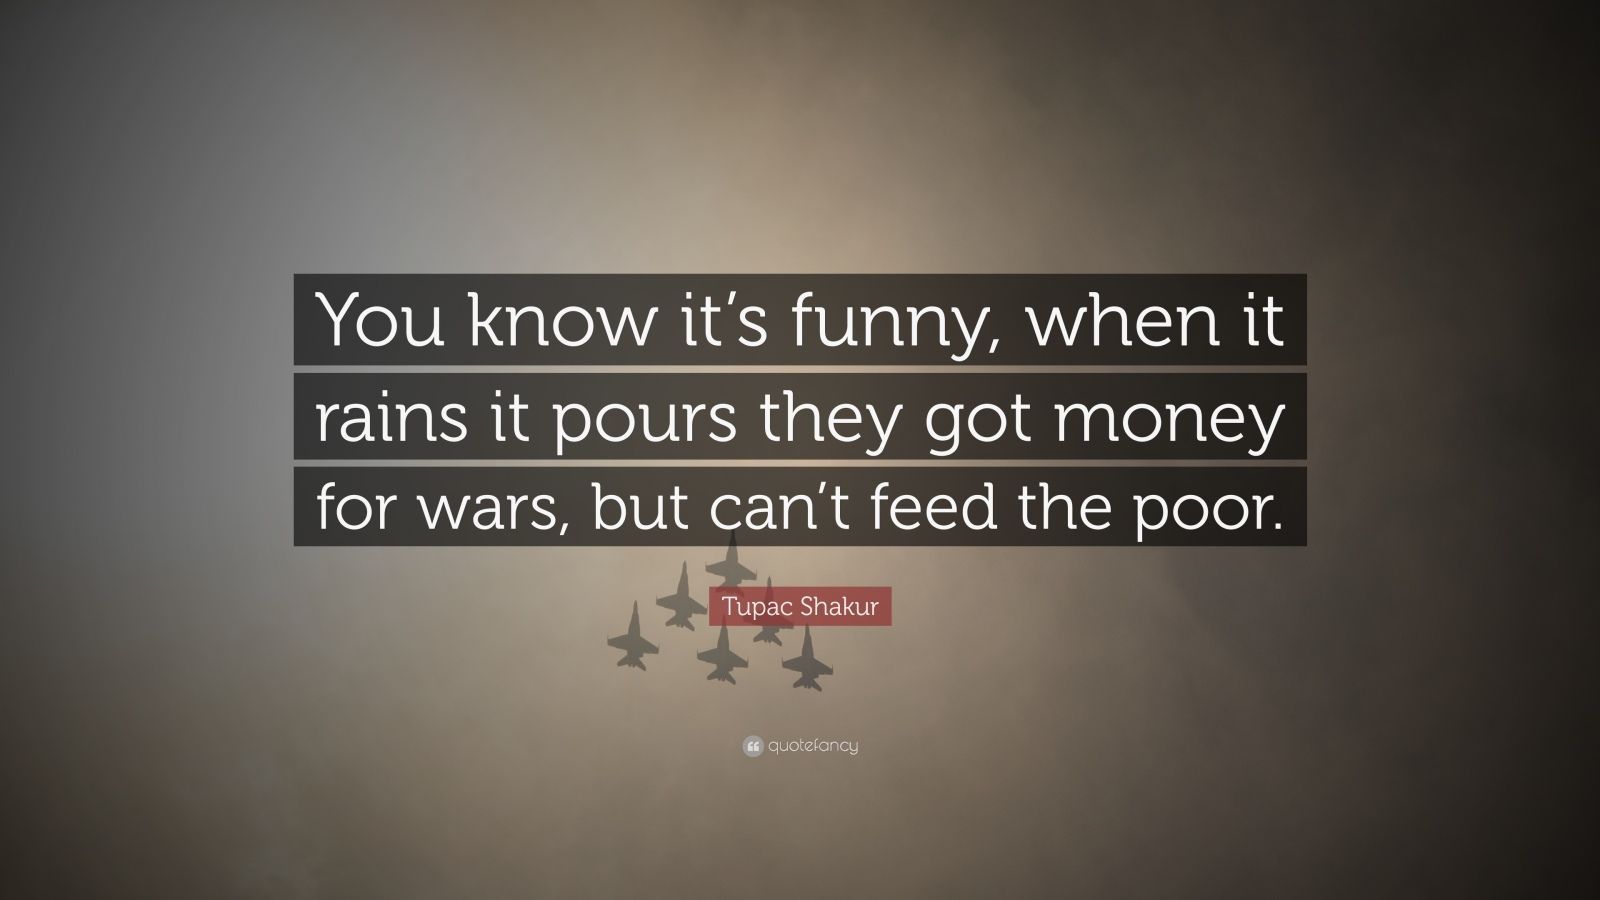 Tupac Shakur Quote: “You know it’s funny, when it rains it pours they